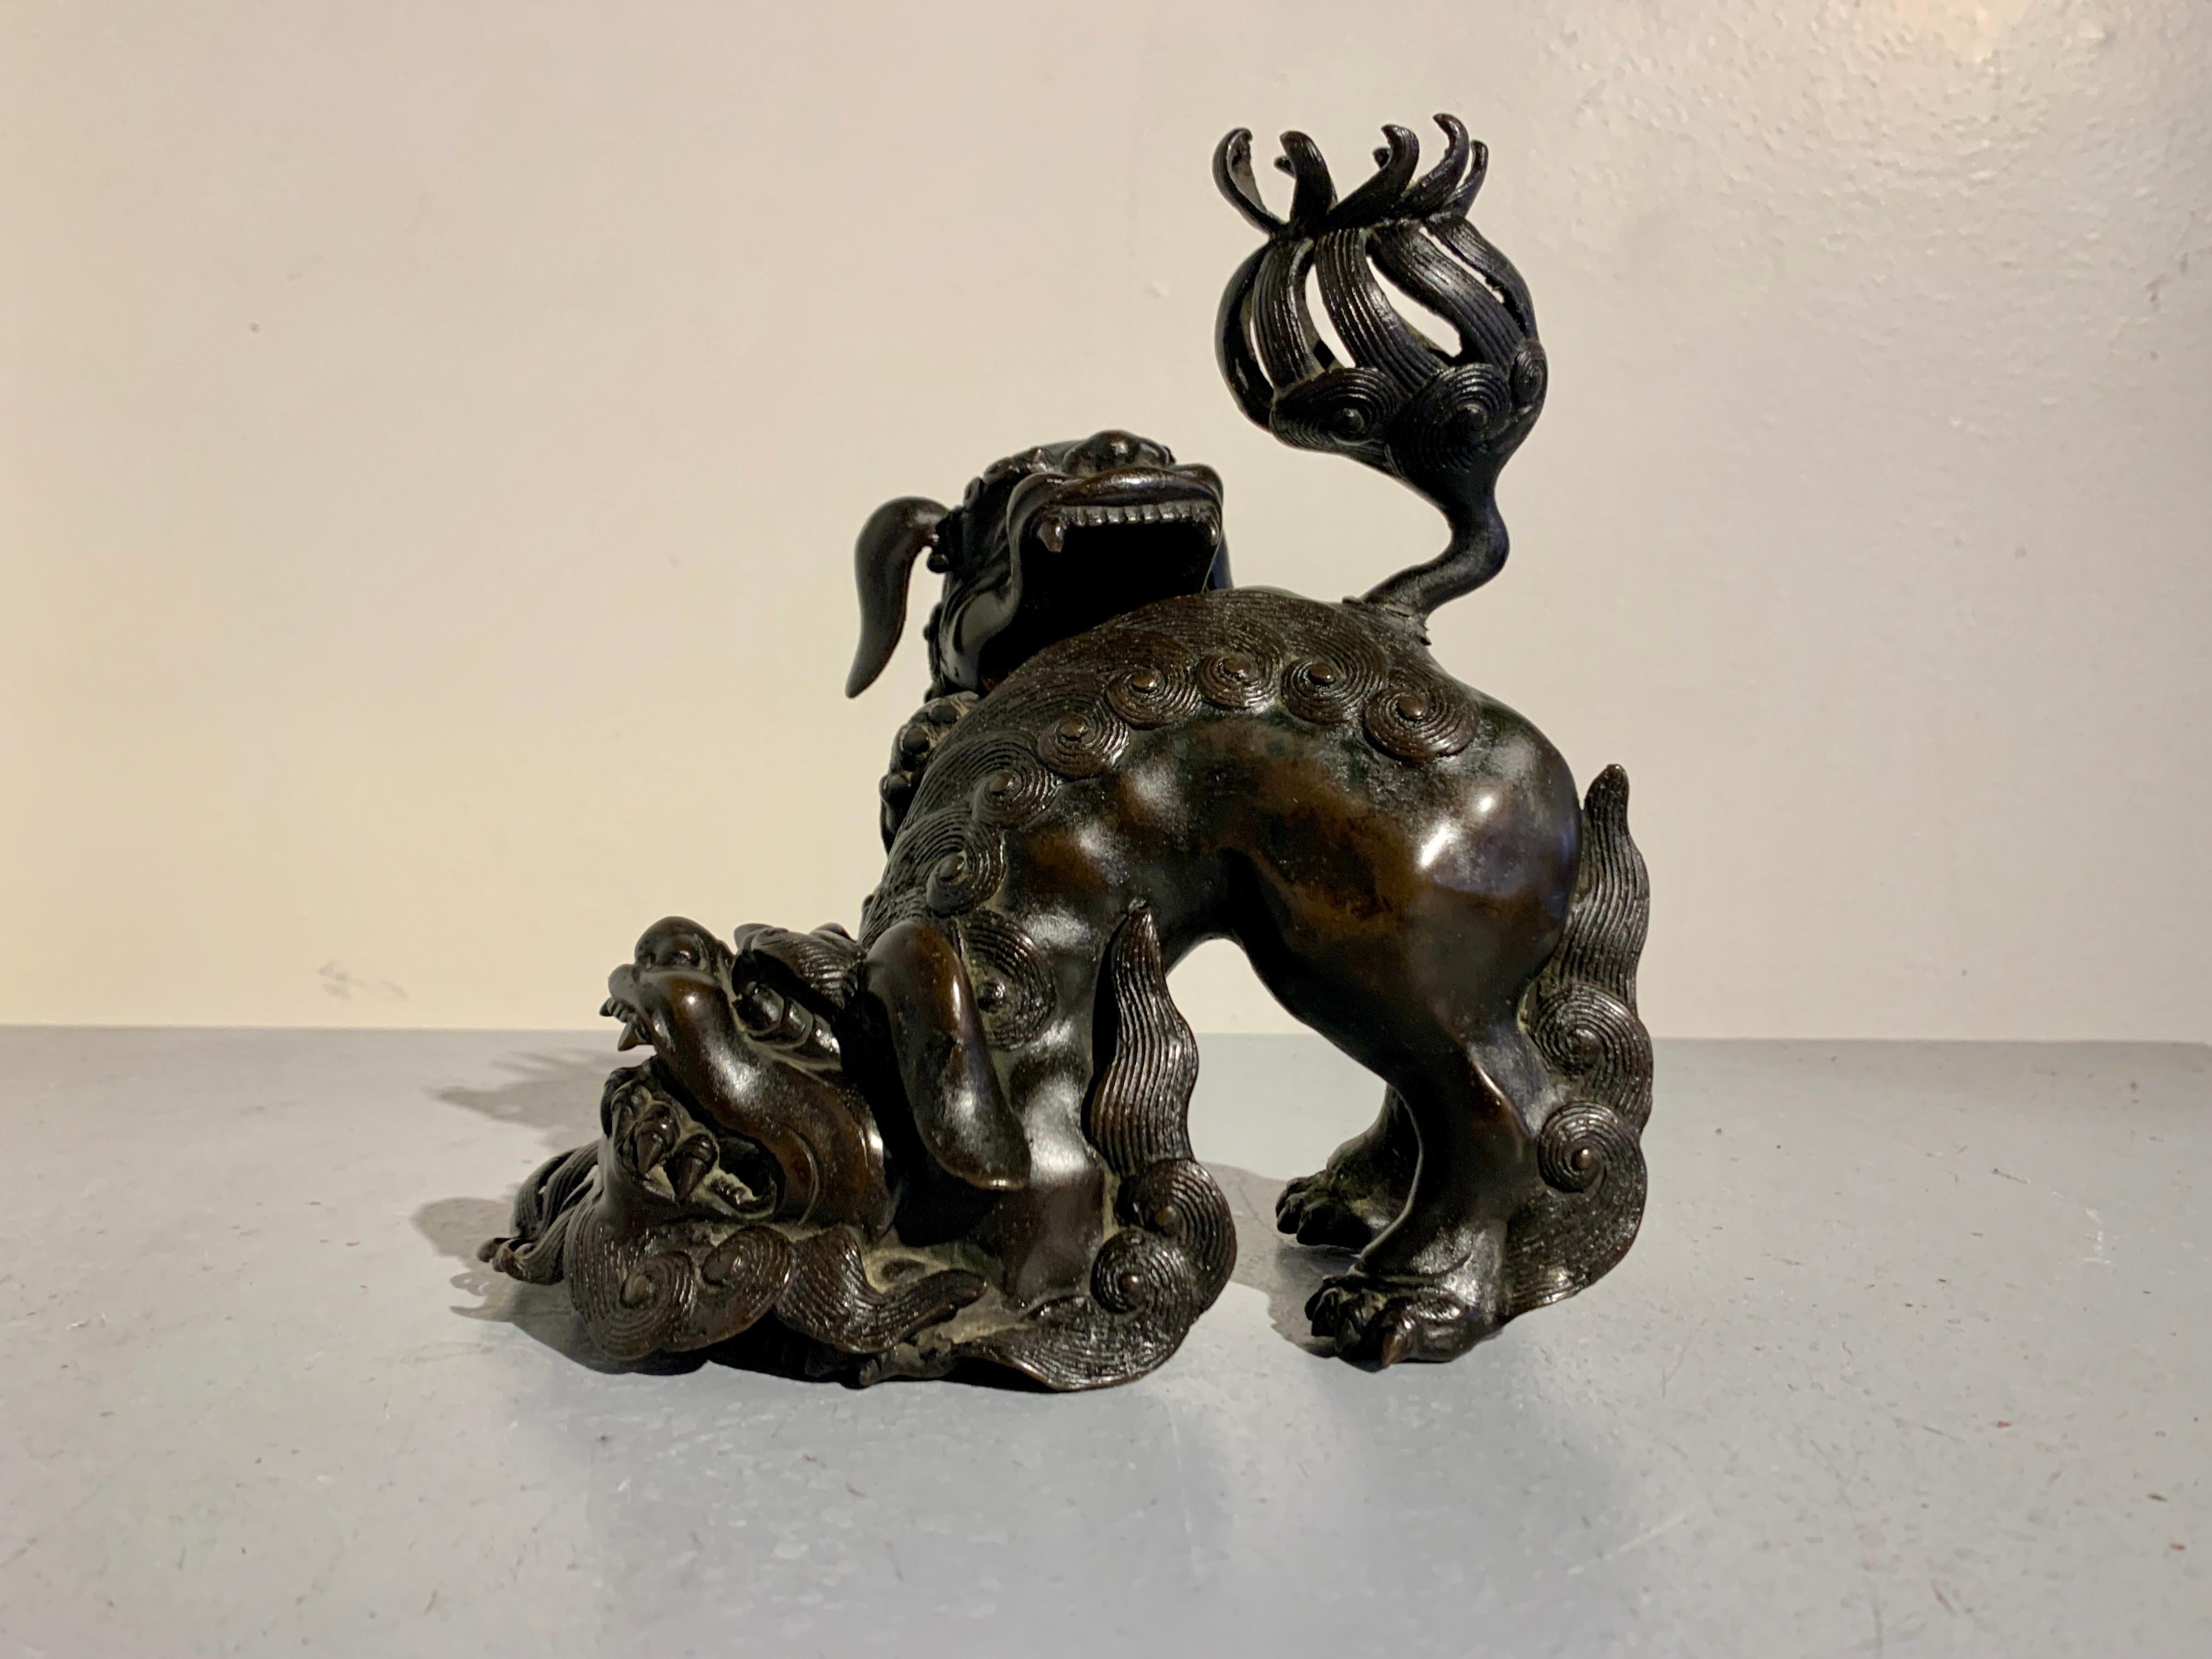 A fantastic Chinese cast bronze censer in the form of two Buddhistic lions play fighting, late Qing Dynasty, late 19th century, China.

The censer formed as a pair of Buddhistic lions, also known as foo lions, engaged in a play fight. The large